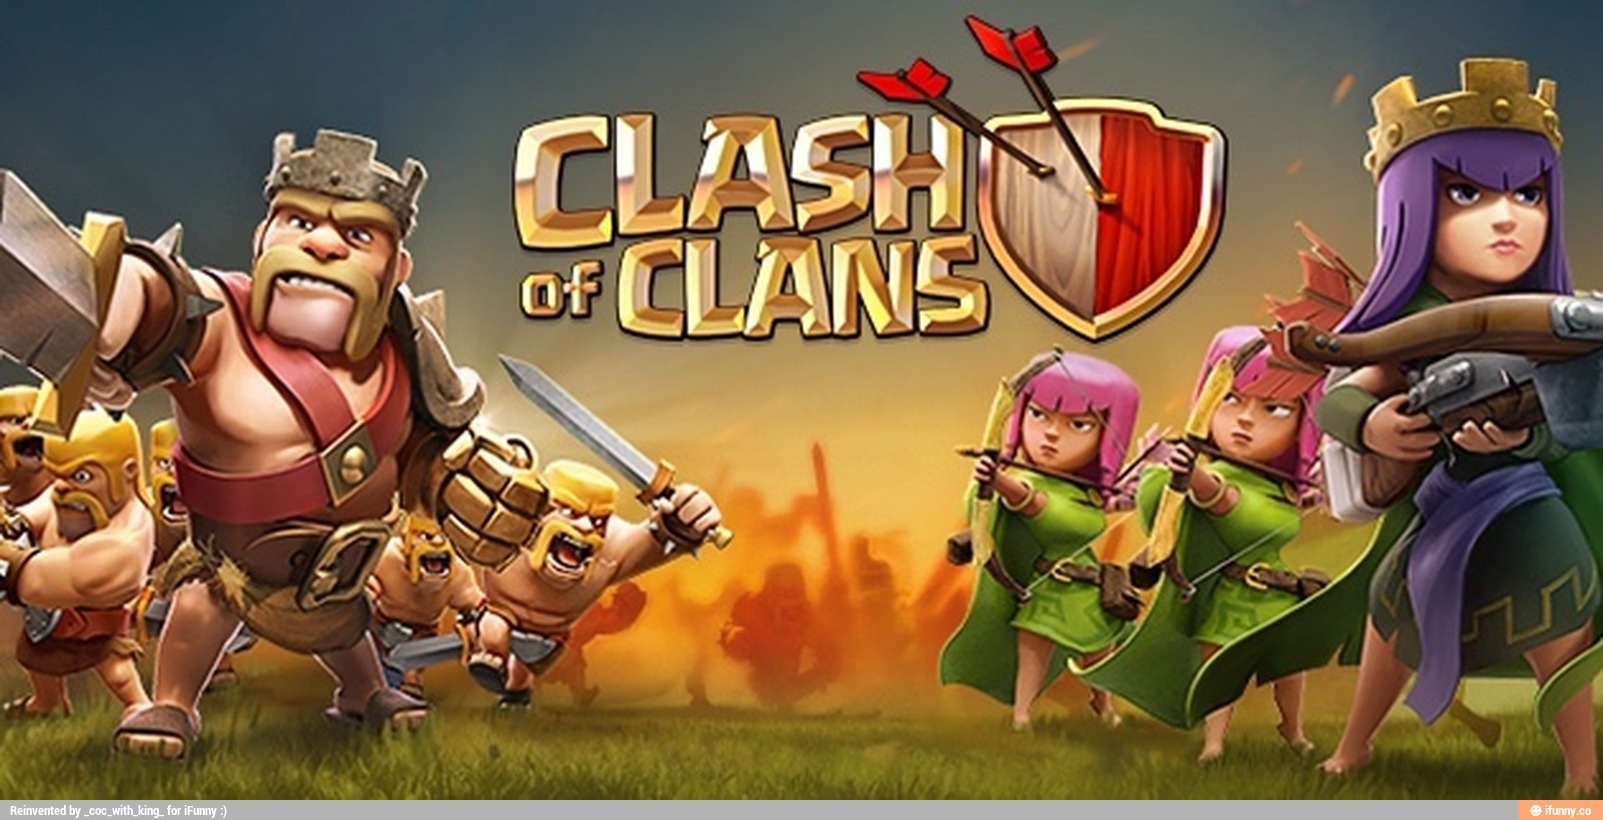 Clash of Clans Wallpapers  HD Wallpapers  ID 20210